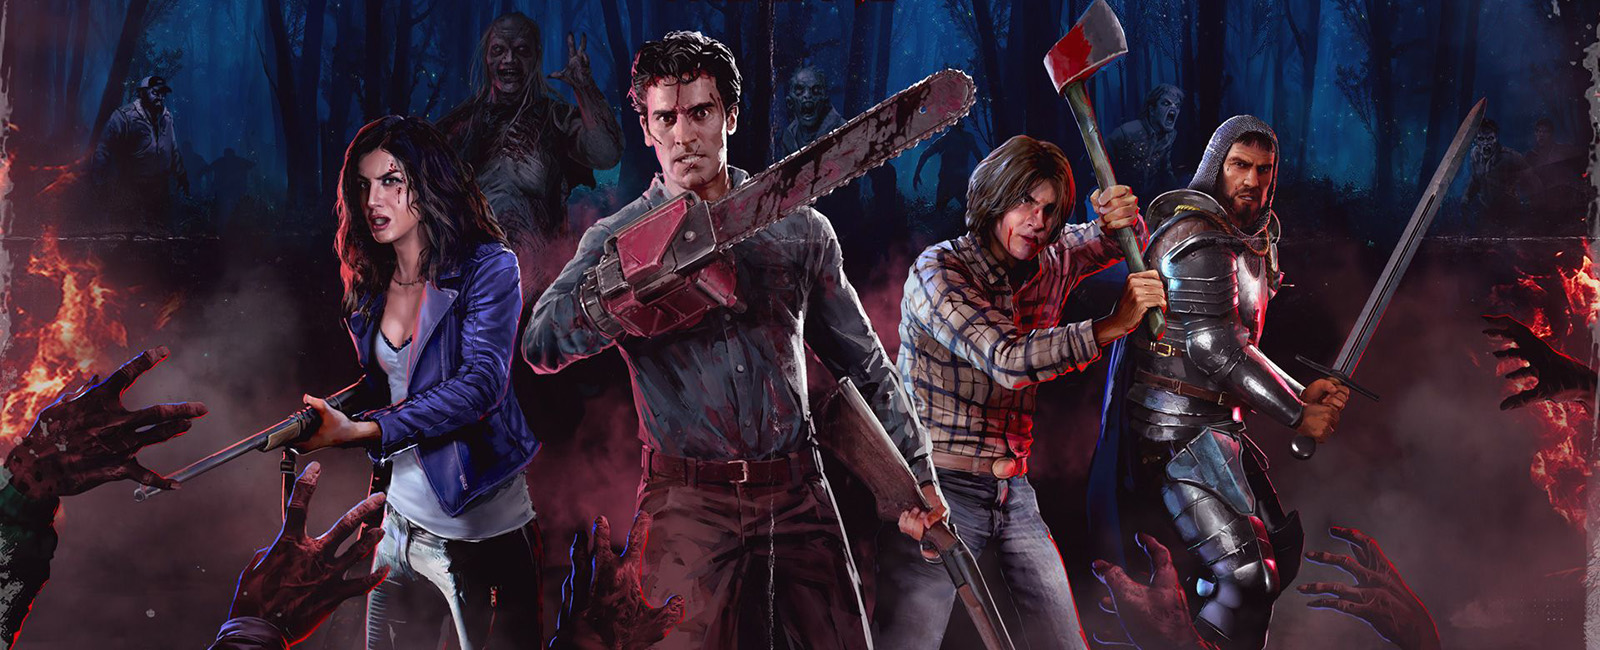 Evil Dead: The Game Review  Devilishly Good - Pure Dead Gaming